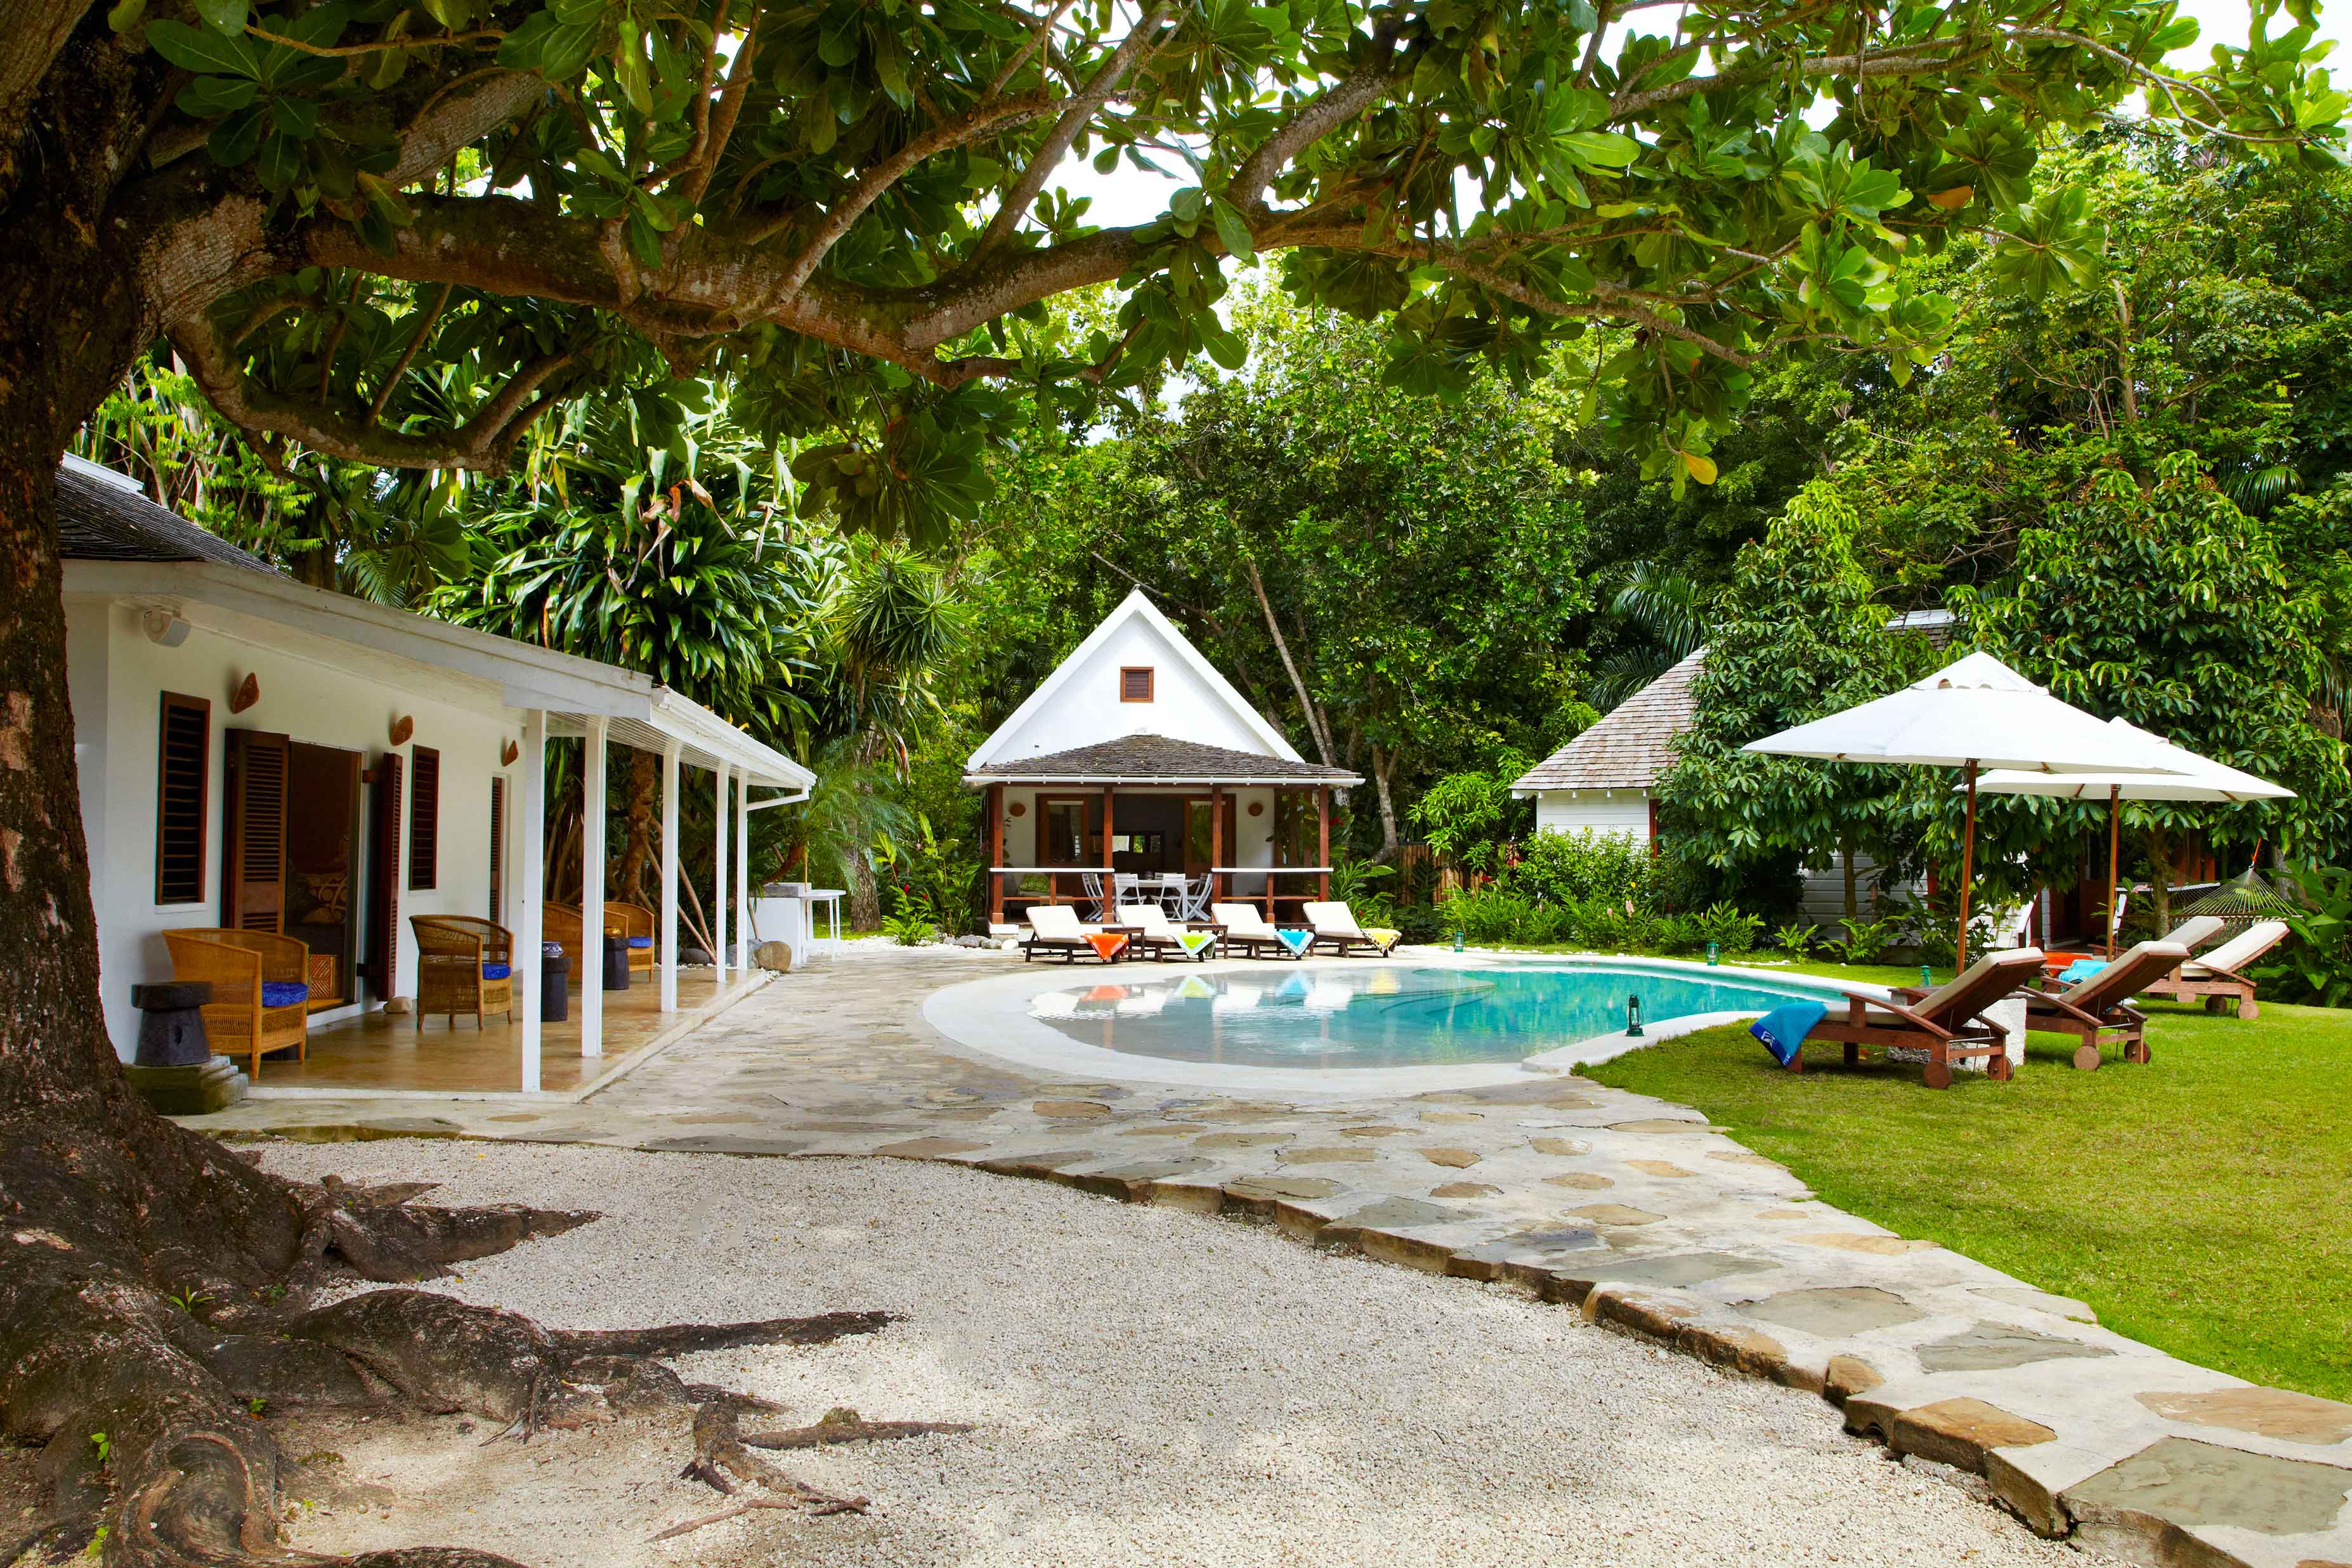 The best villas for group holidays | GoldenEye, Jamaica | Mr & Mrs Smith Editorial 